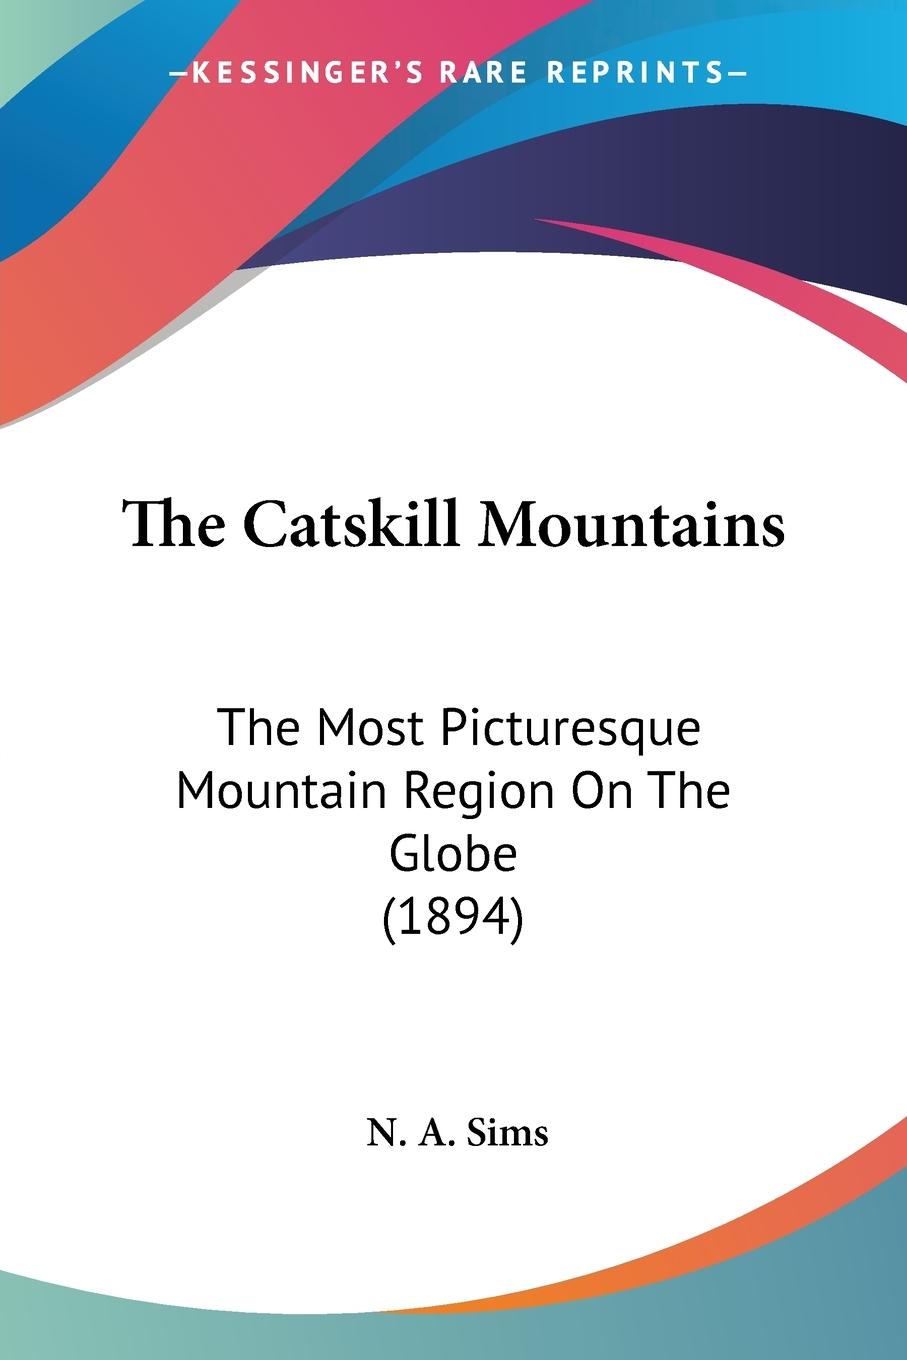 The Catskill Mountains - Sims, N. A.